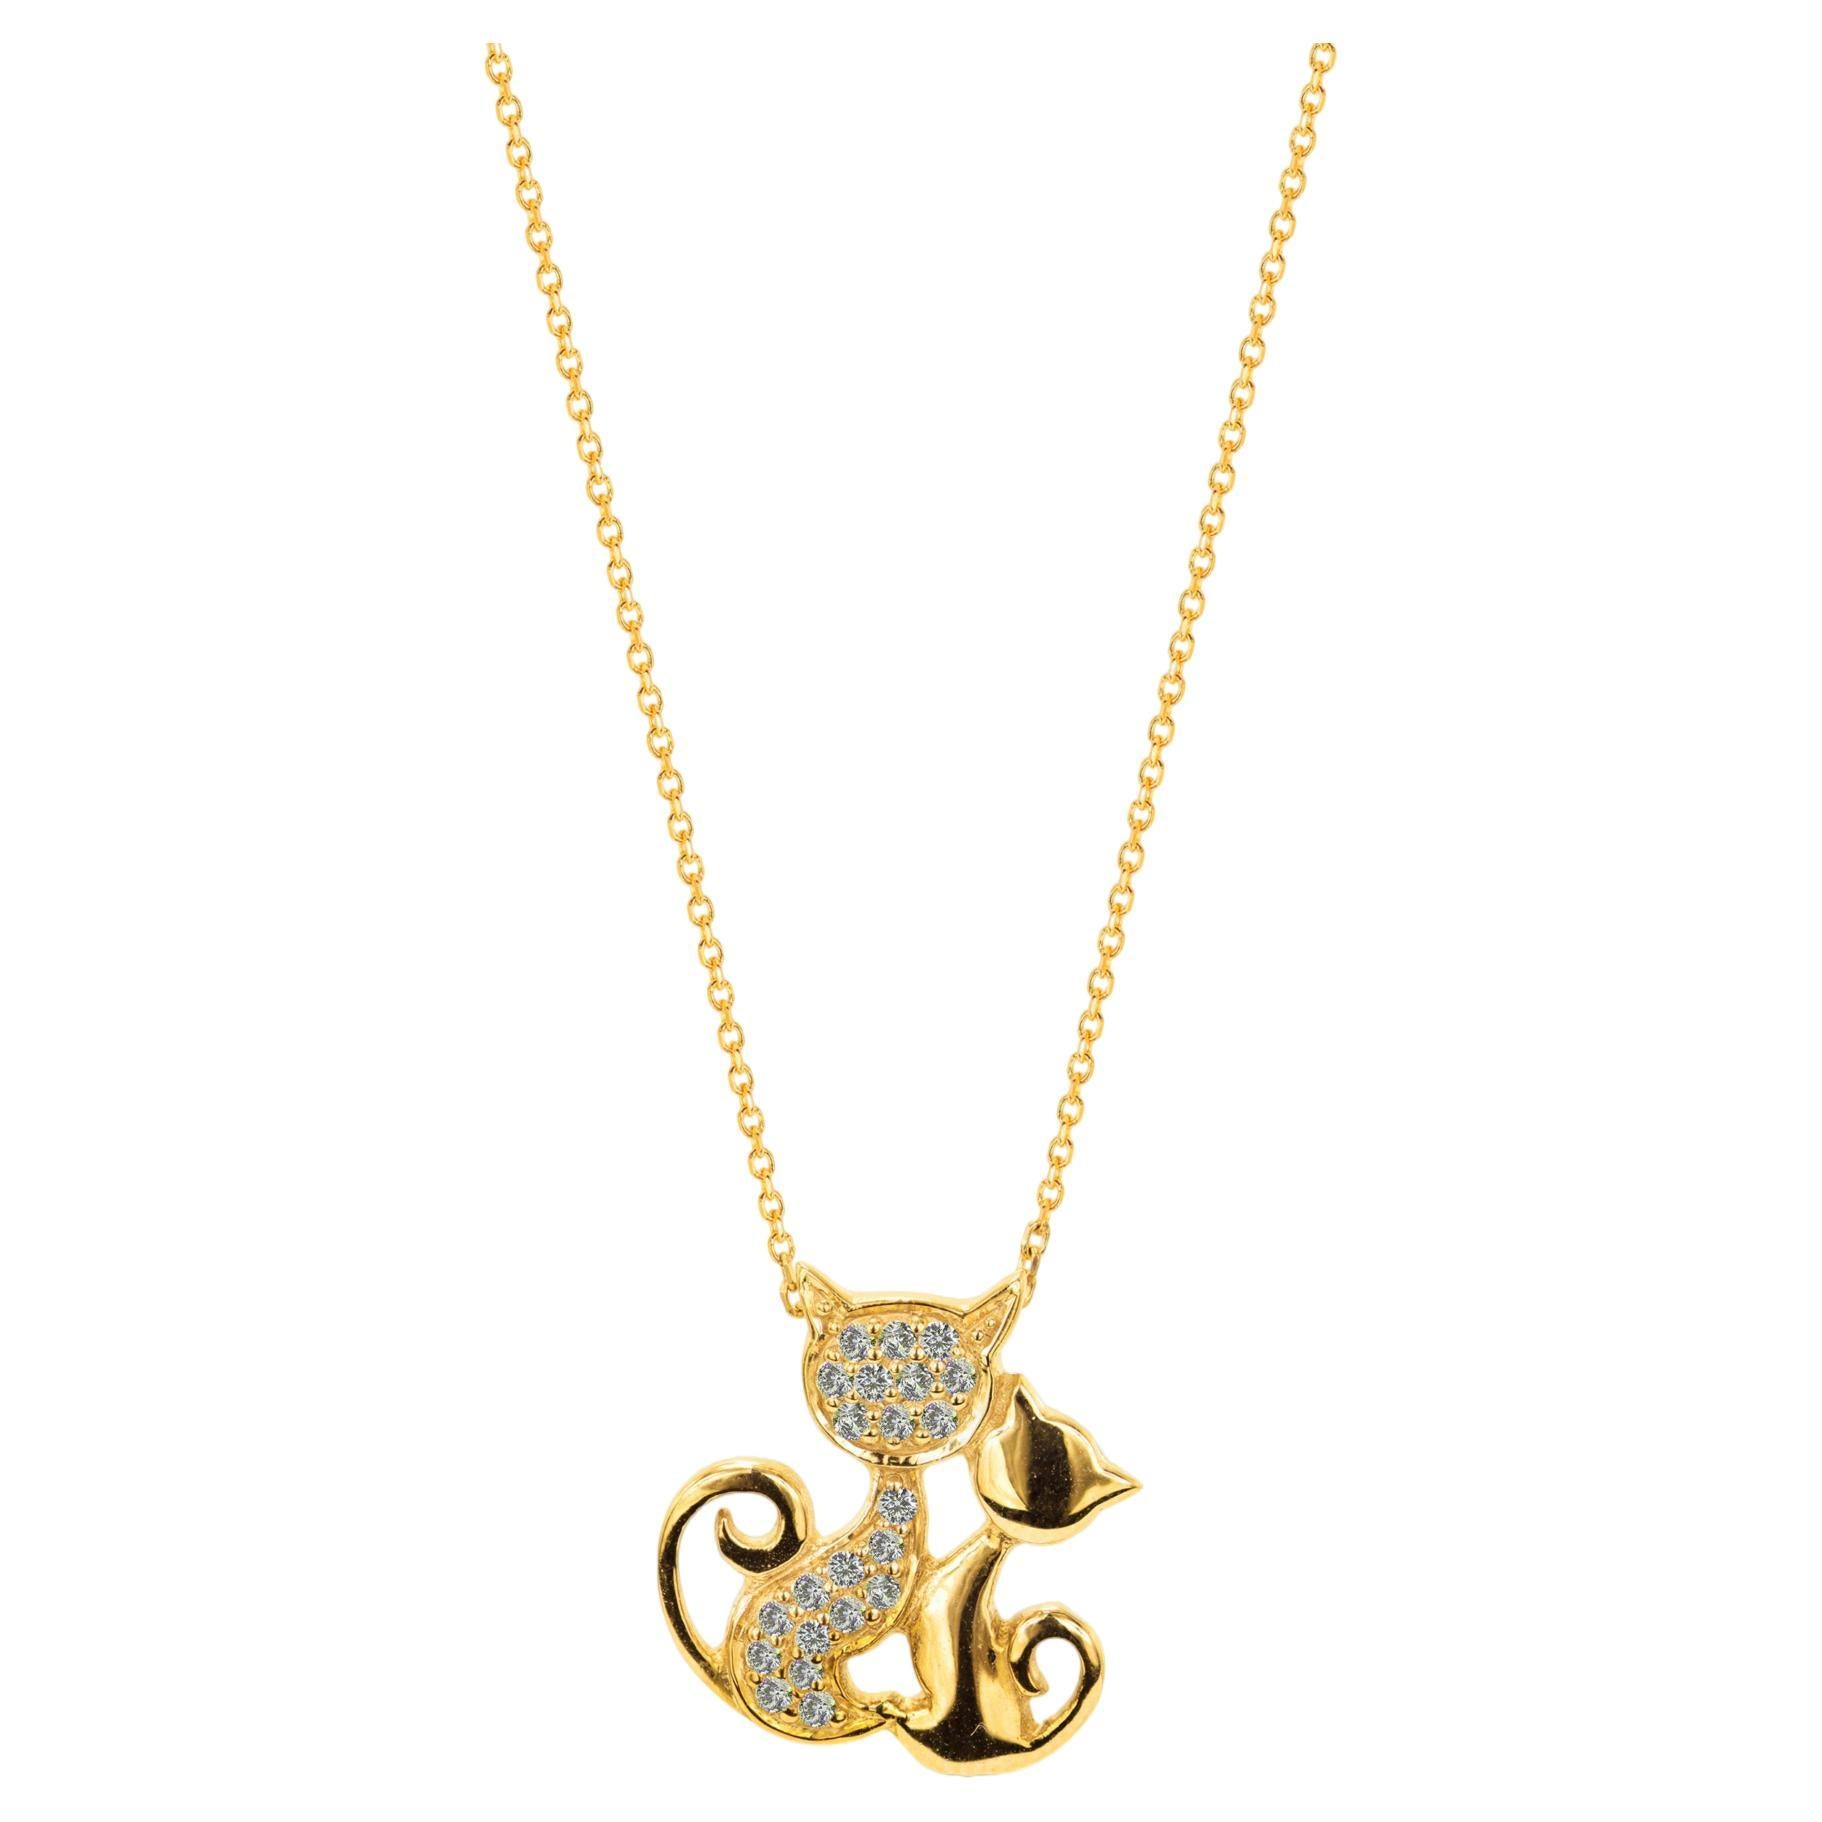 14k White and Yellow Gold Diamond Cat Charm Necklace Two Tone Diamond Necklace